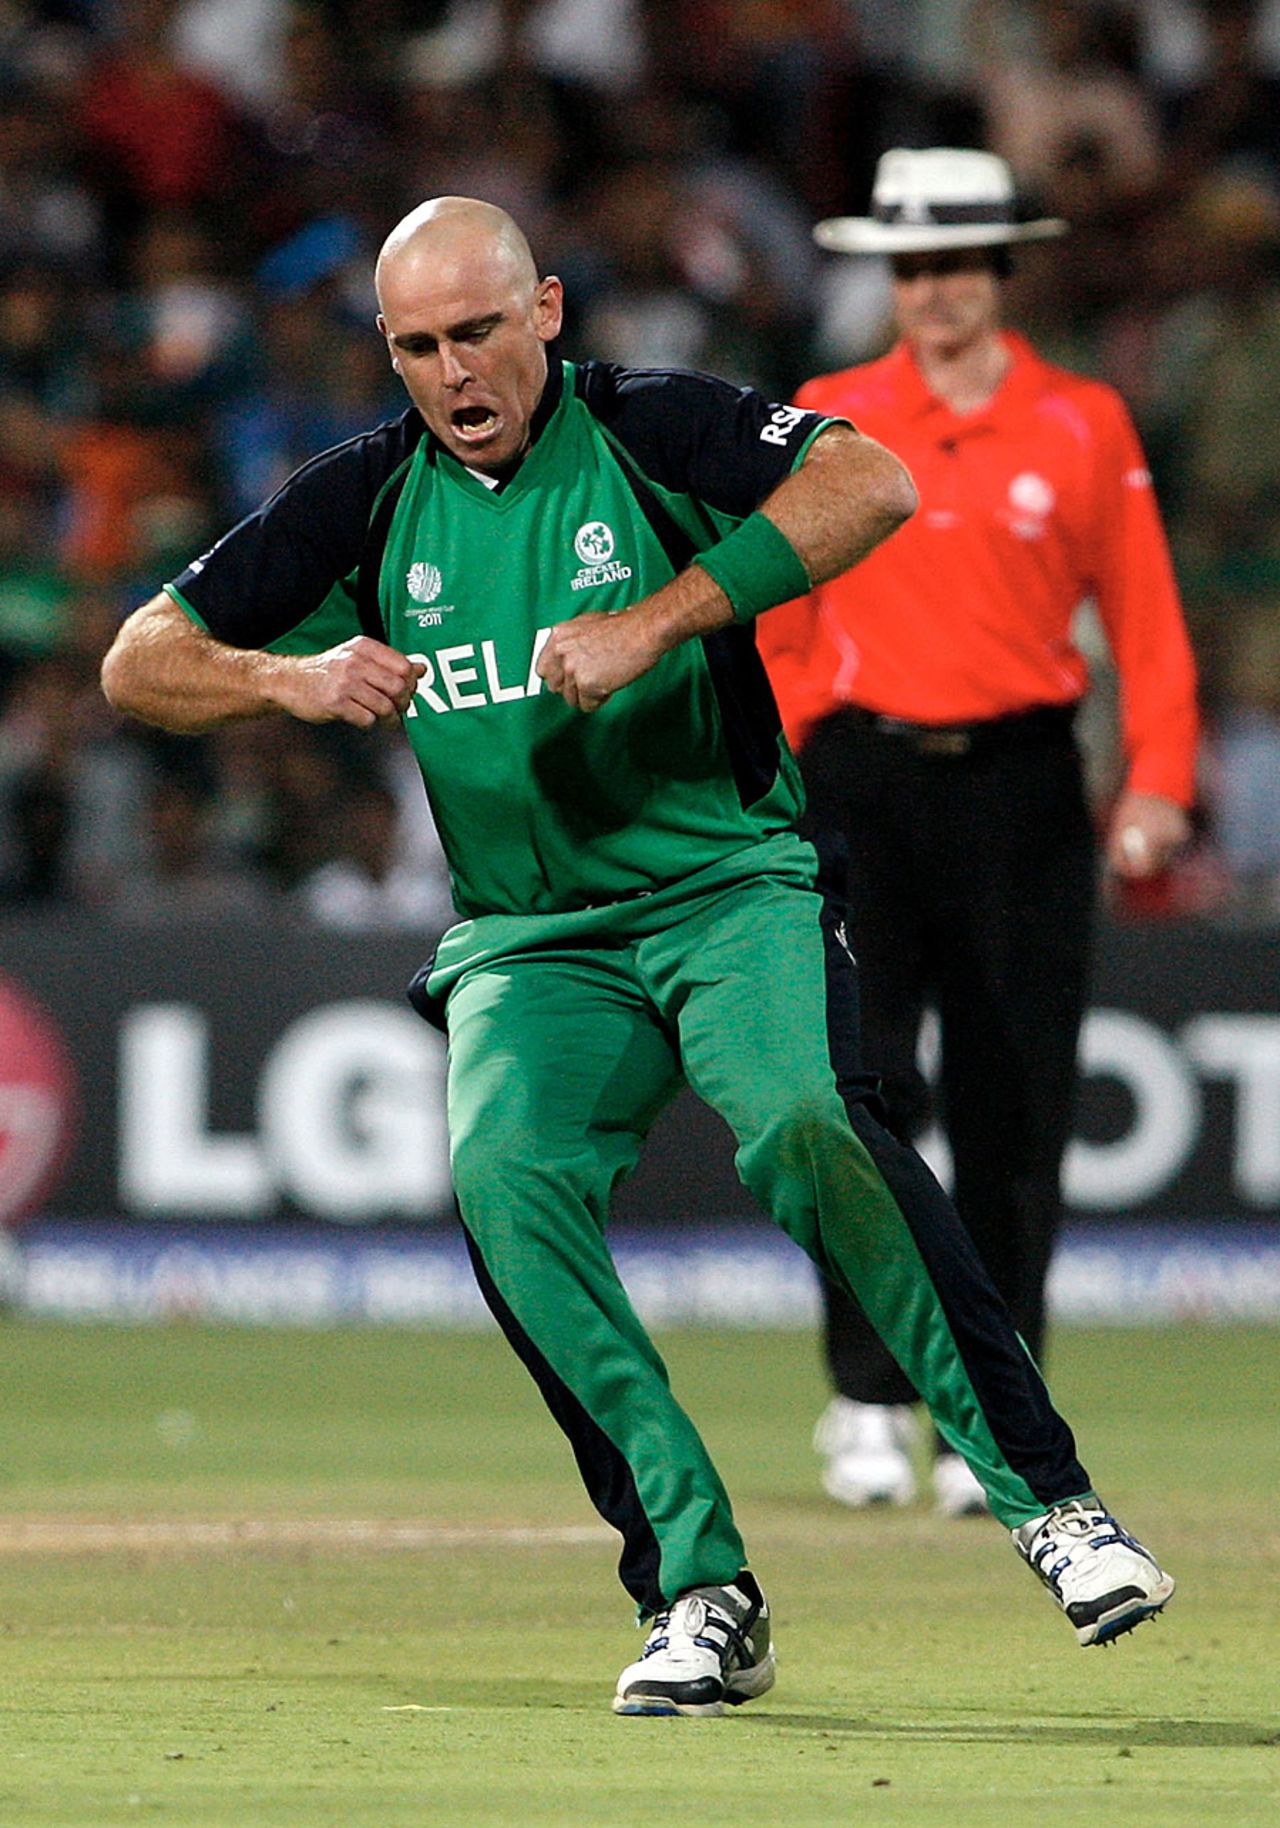 Trent Johnston does the chicken dance, India v Ireland, Group B, World Cup 2011, Bangalore, March 6, 2011